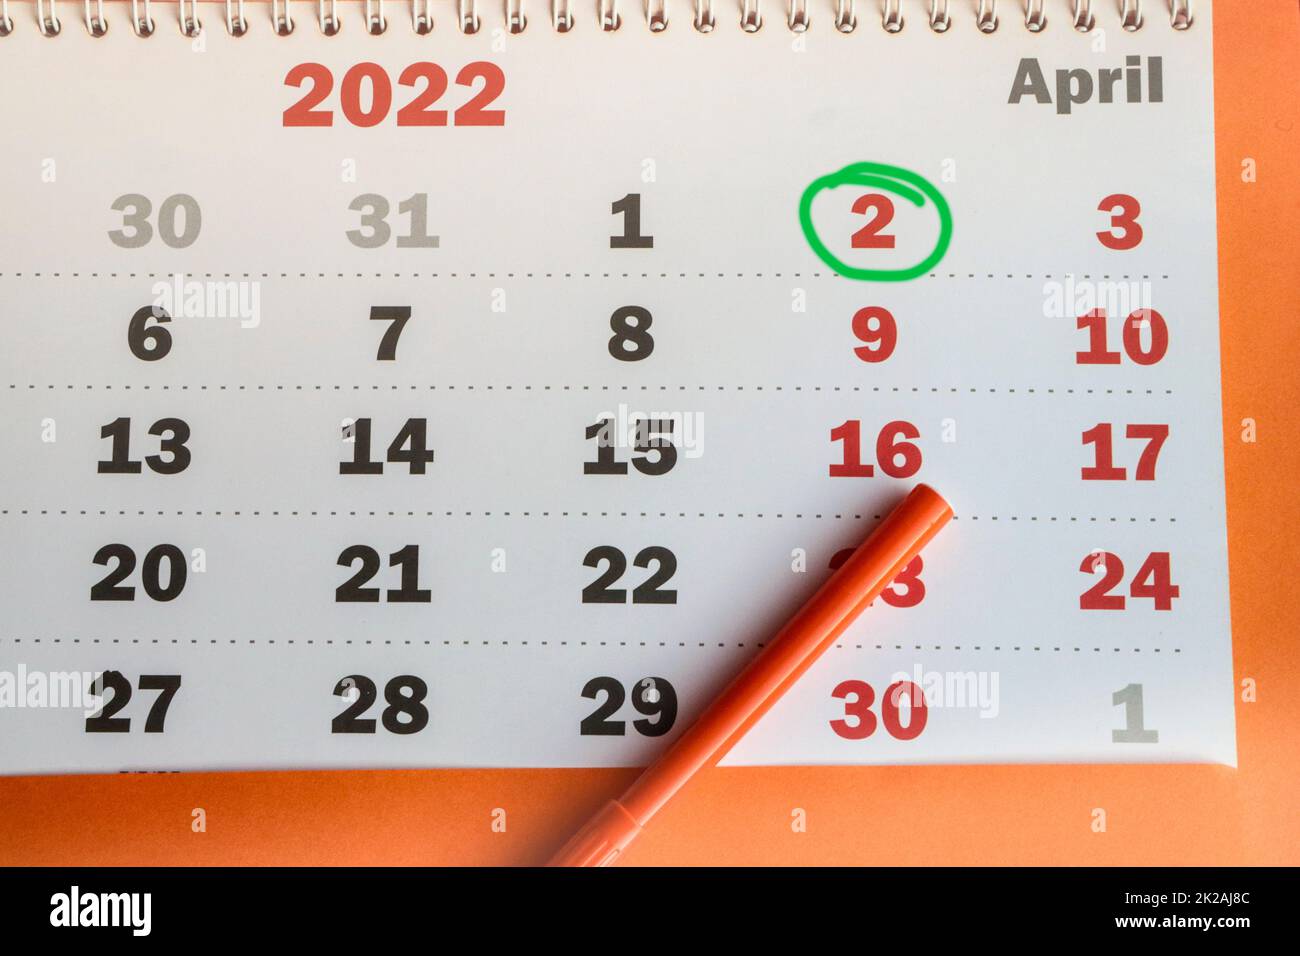 International Children's Book Day, wall-mounted paper calendar with a highlighted date of April 02, 2022 and an orange marker, top view Stock Photo